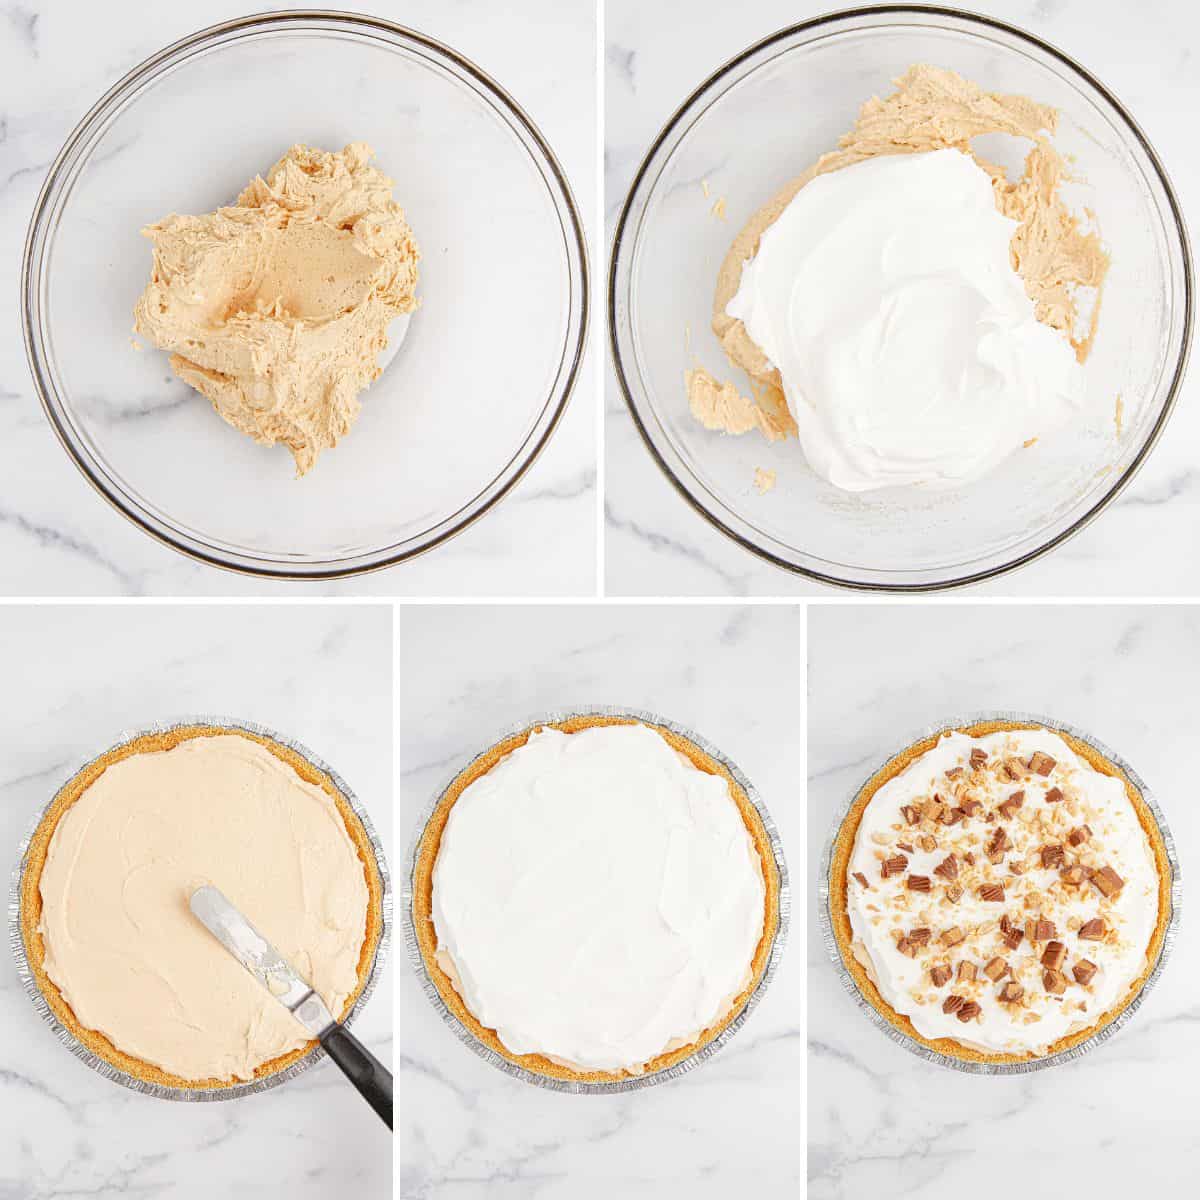 Collage of photos of recipe process: ingredients mixed together in a glass bowl, cool whip added to bowl, peanut butter filling being spread into pie crust with offset spatula, cool whip spread on top of pie, and pie topped with chopped peanut butter cups and peanuts.